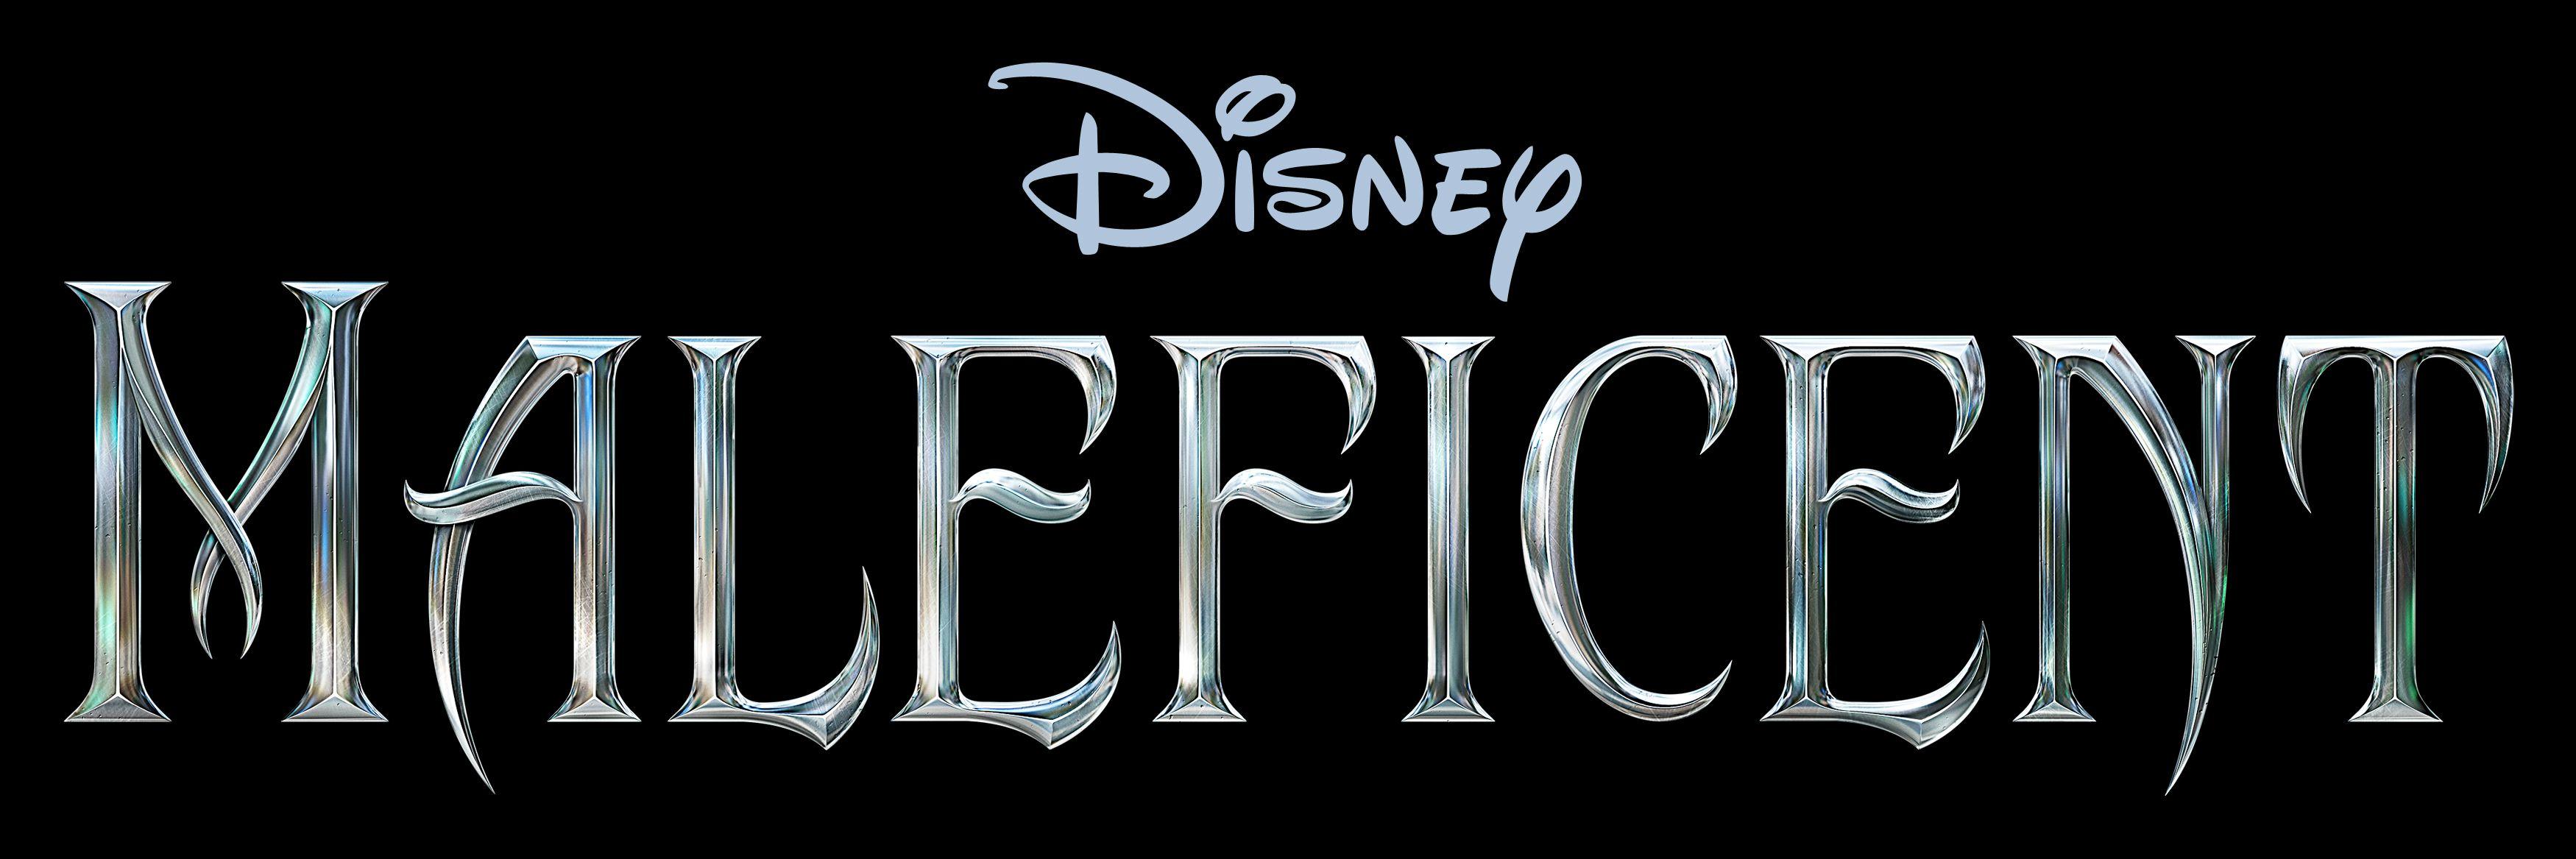 Disney Movie Logo - TOMORROWLAND, MALEFICENT, MUPPETS MOST WANTED, and SAVING MR. BANKS ...